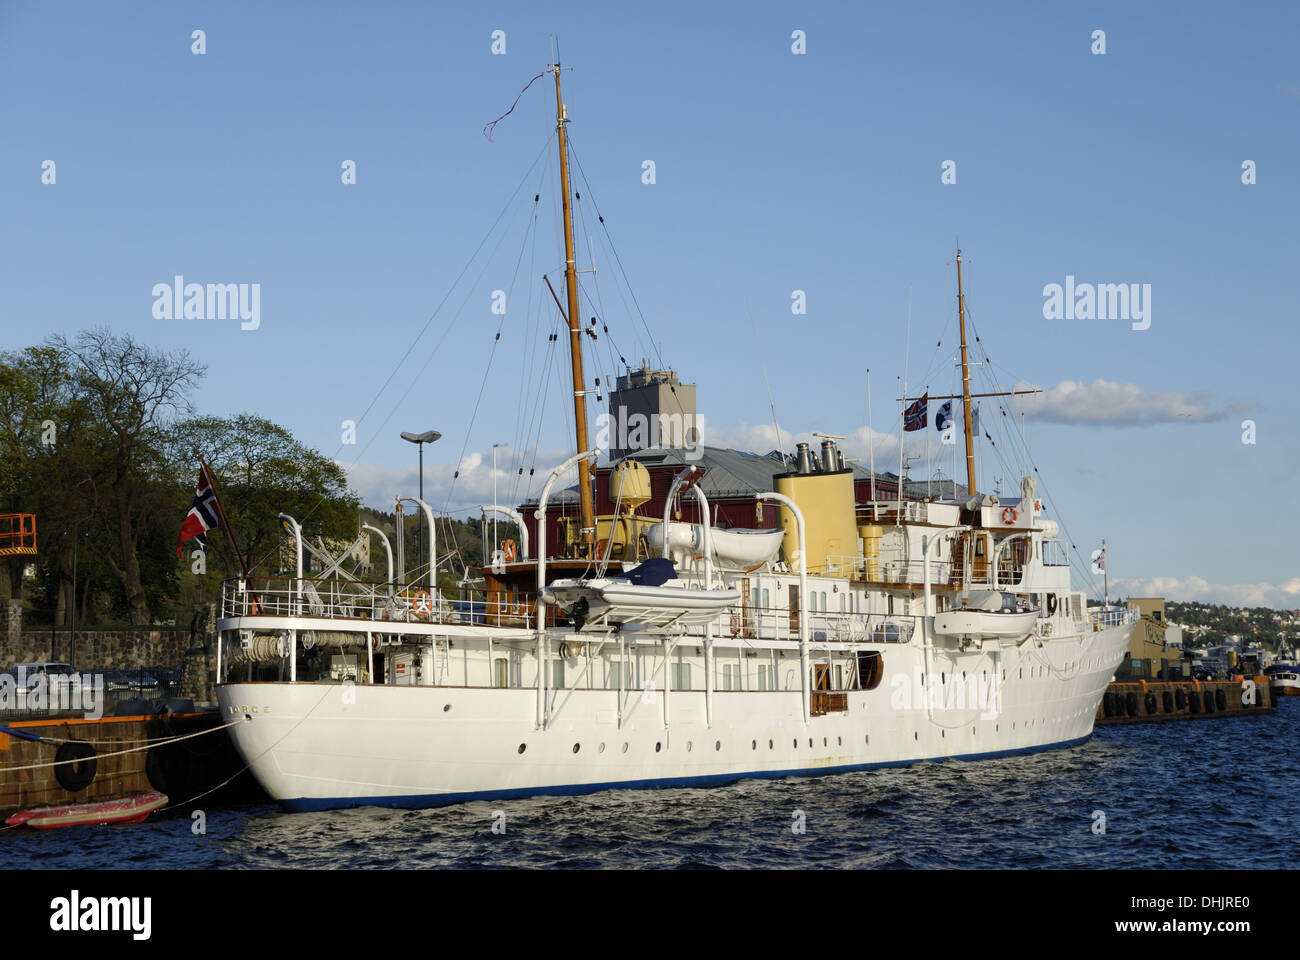 Royal Yacht Norge in Oslo Stock Photo